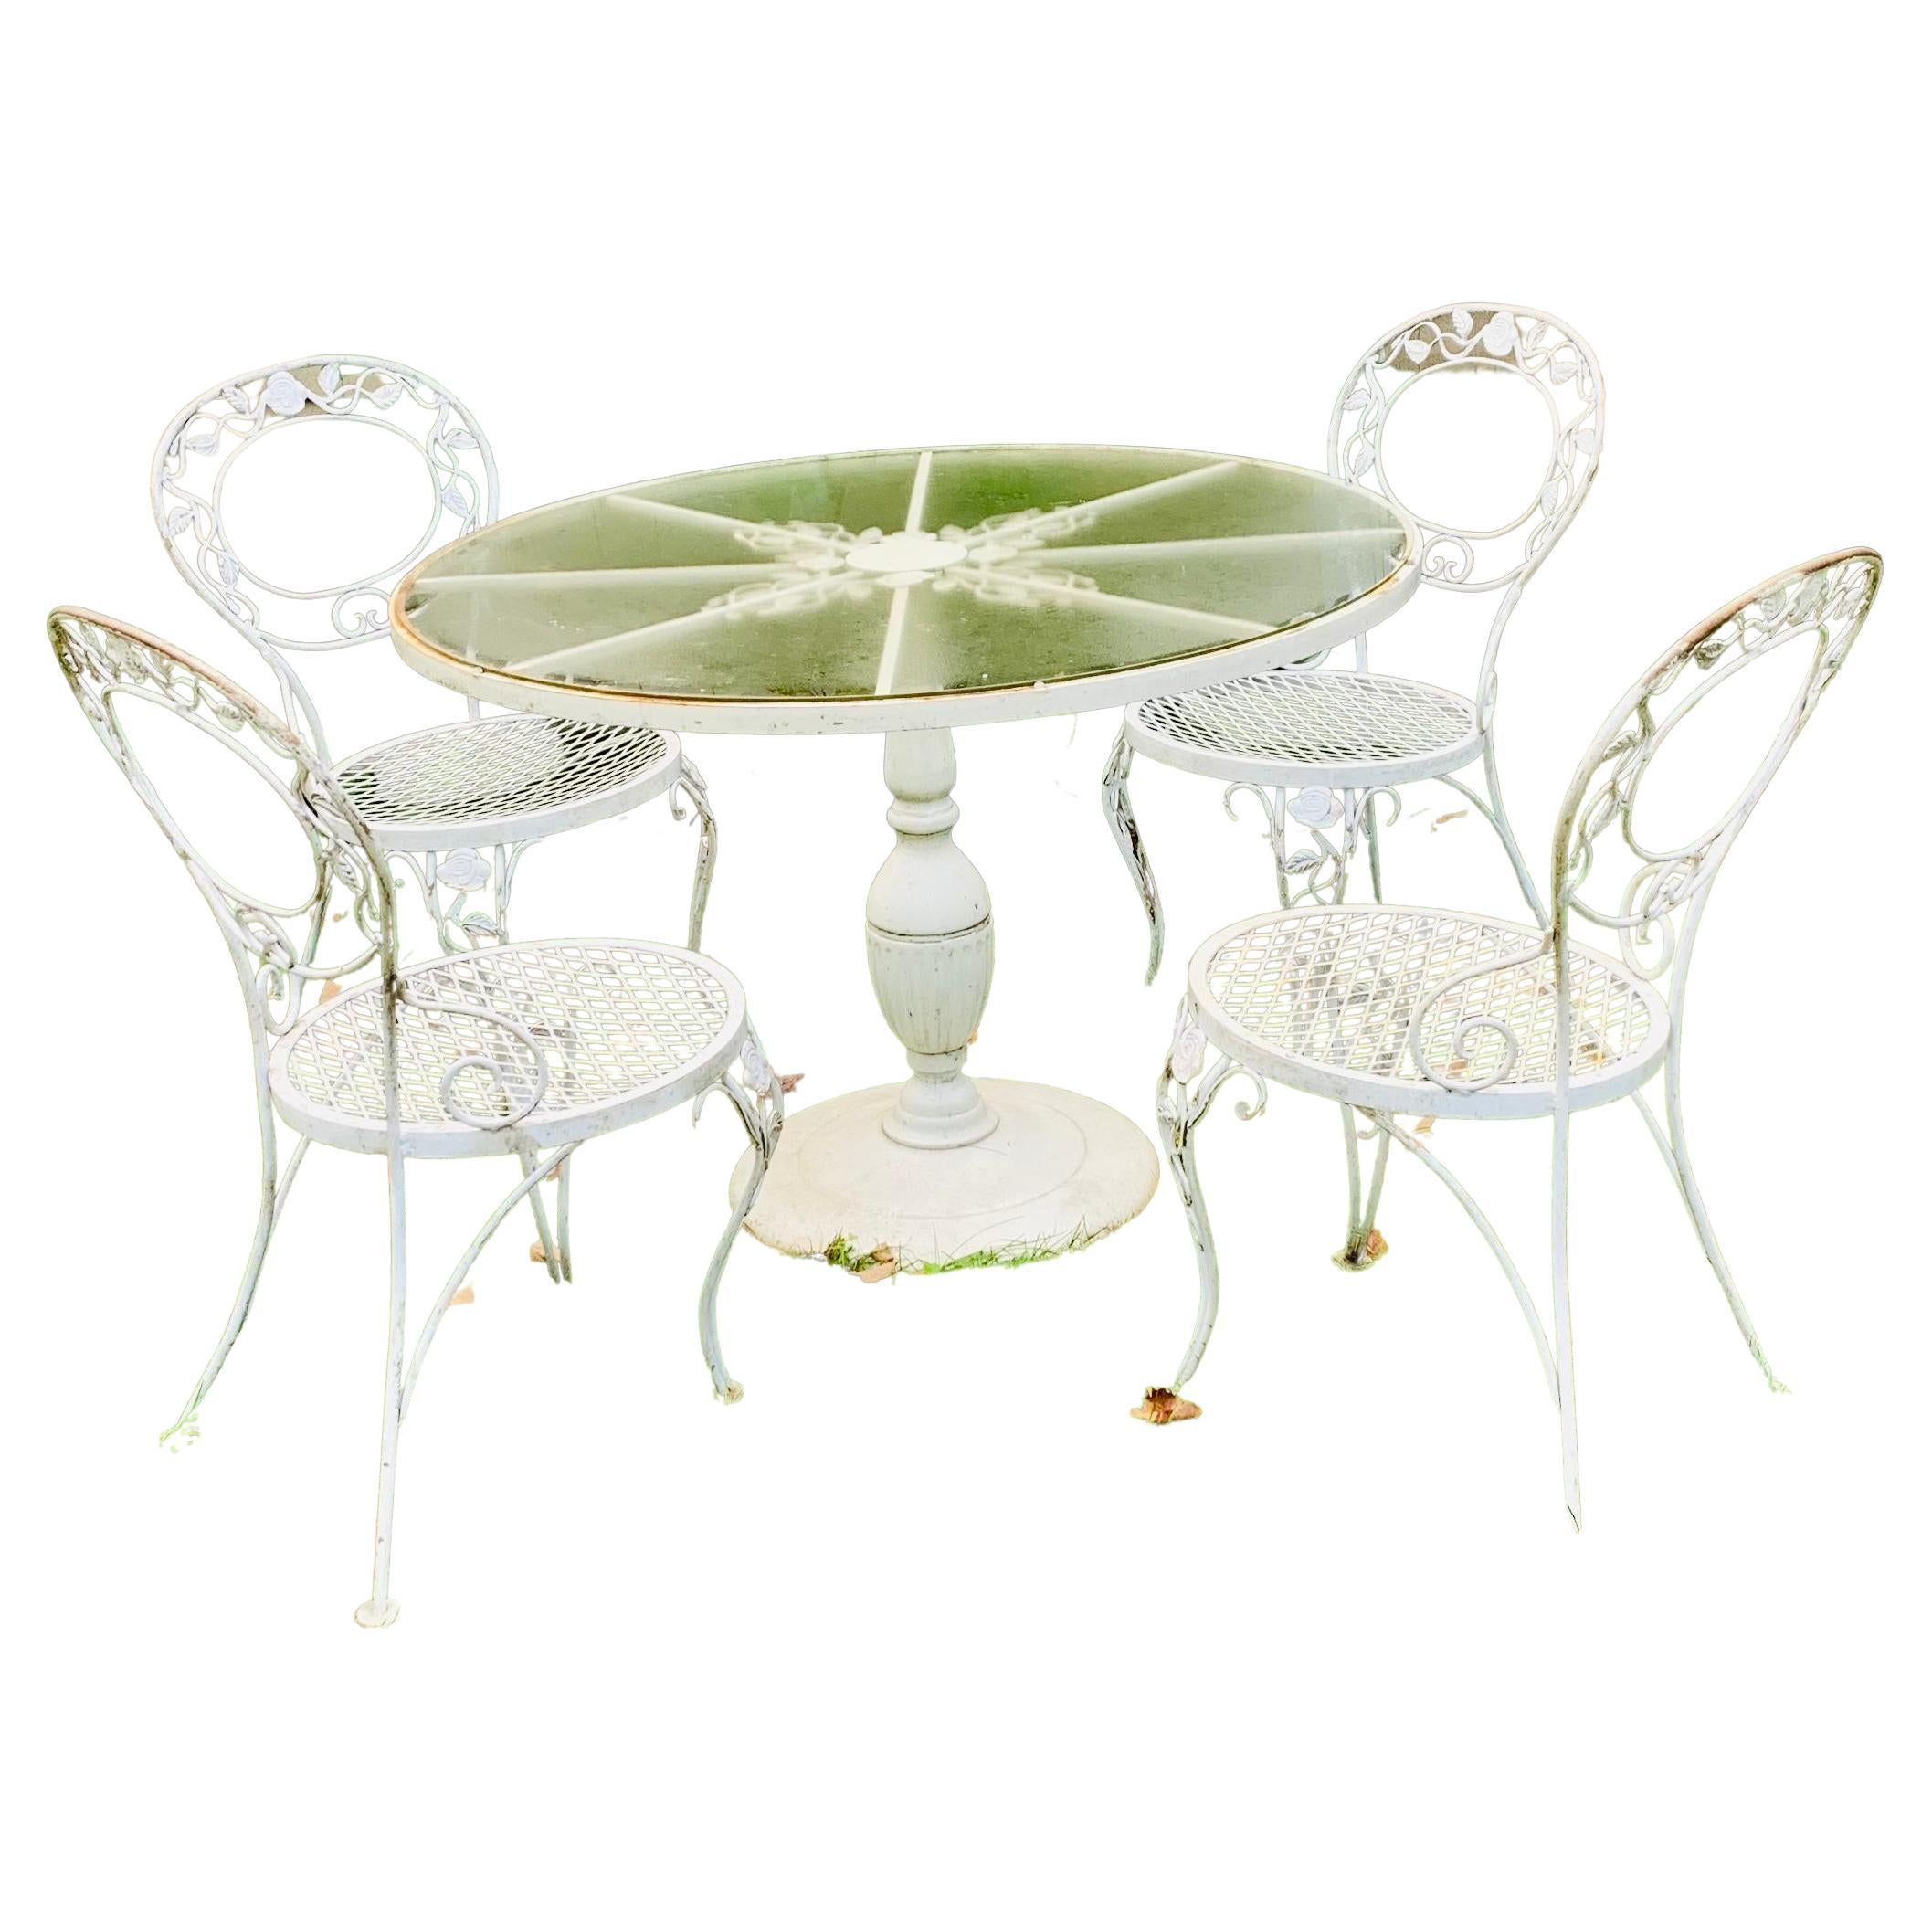 Woodard Chantilly Rose Outdoor Patio Dining Set-5 Piece Set For Sale